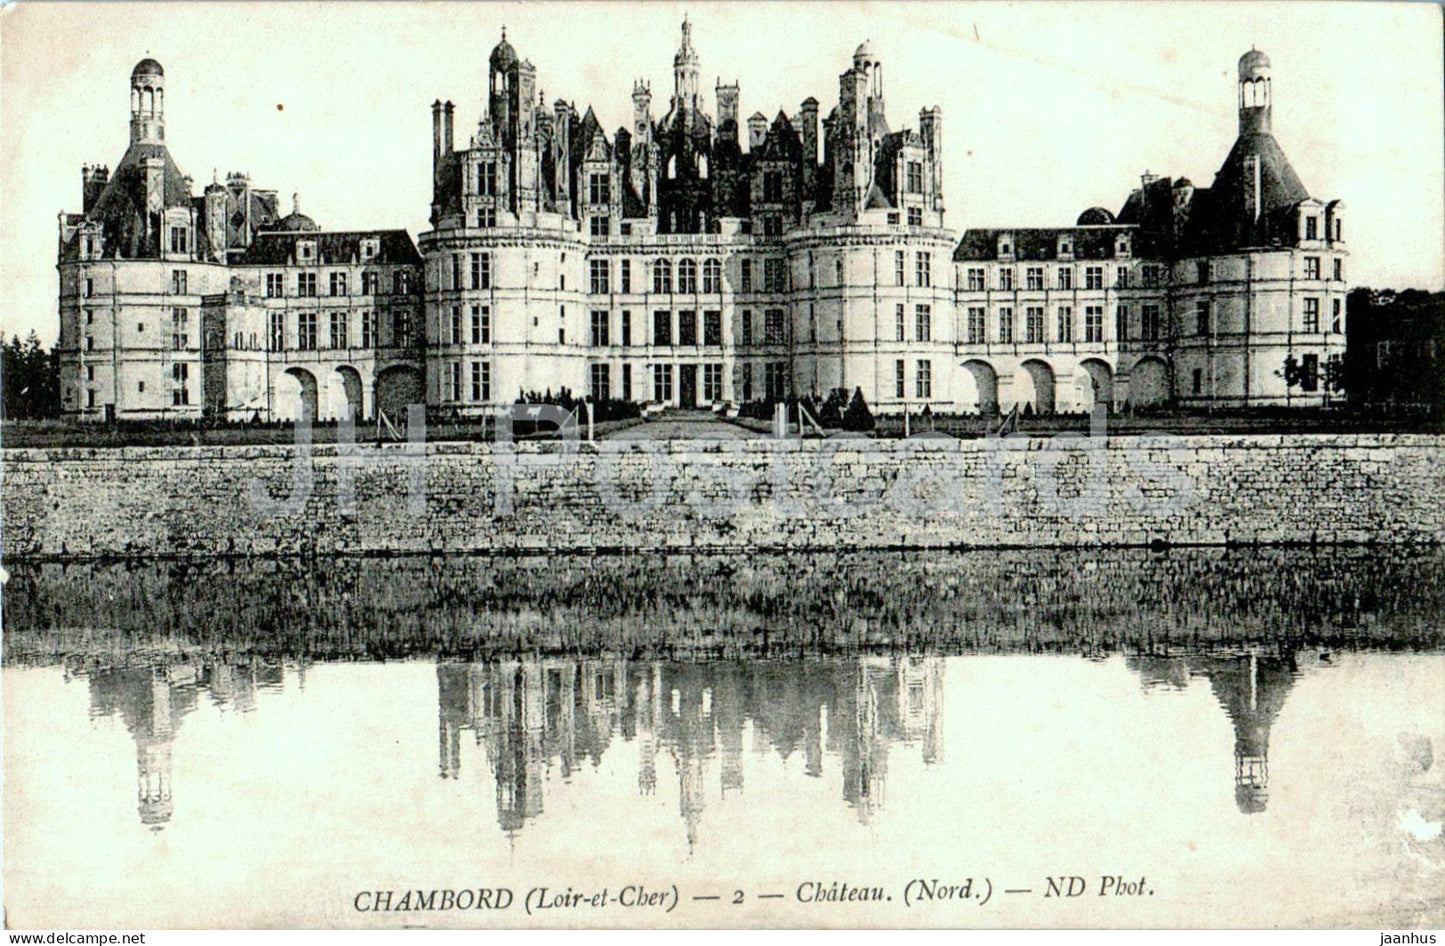 Chambord - Chateau - Nord - castle - 2 - old postcard - 1919 - France - used - JH Postcards